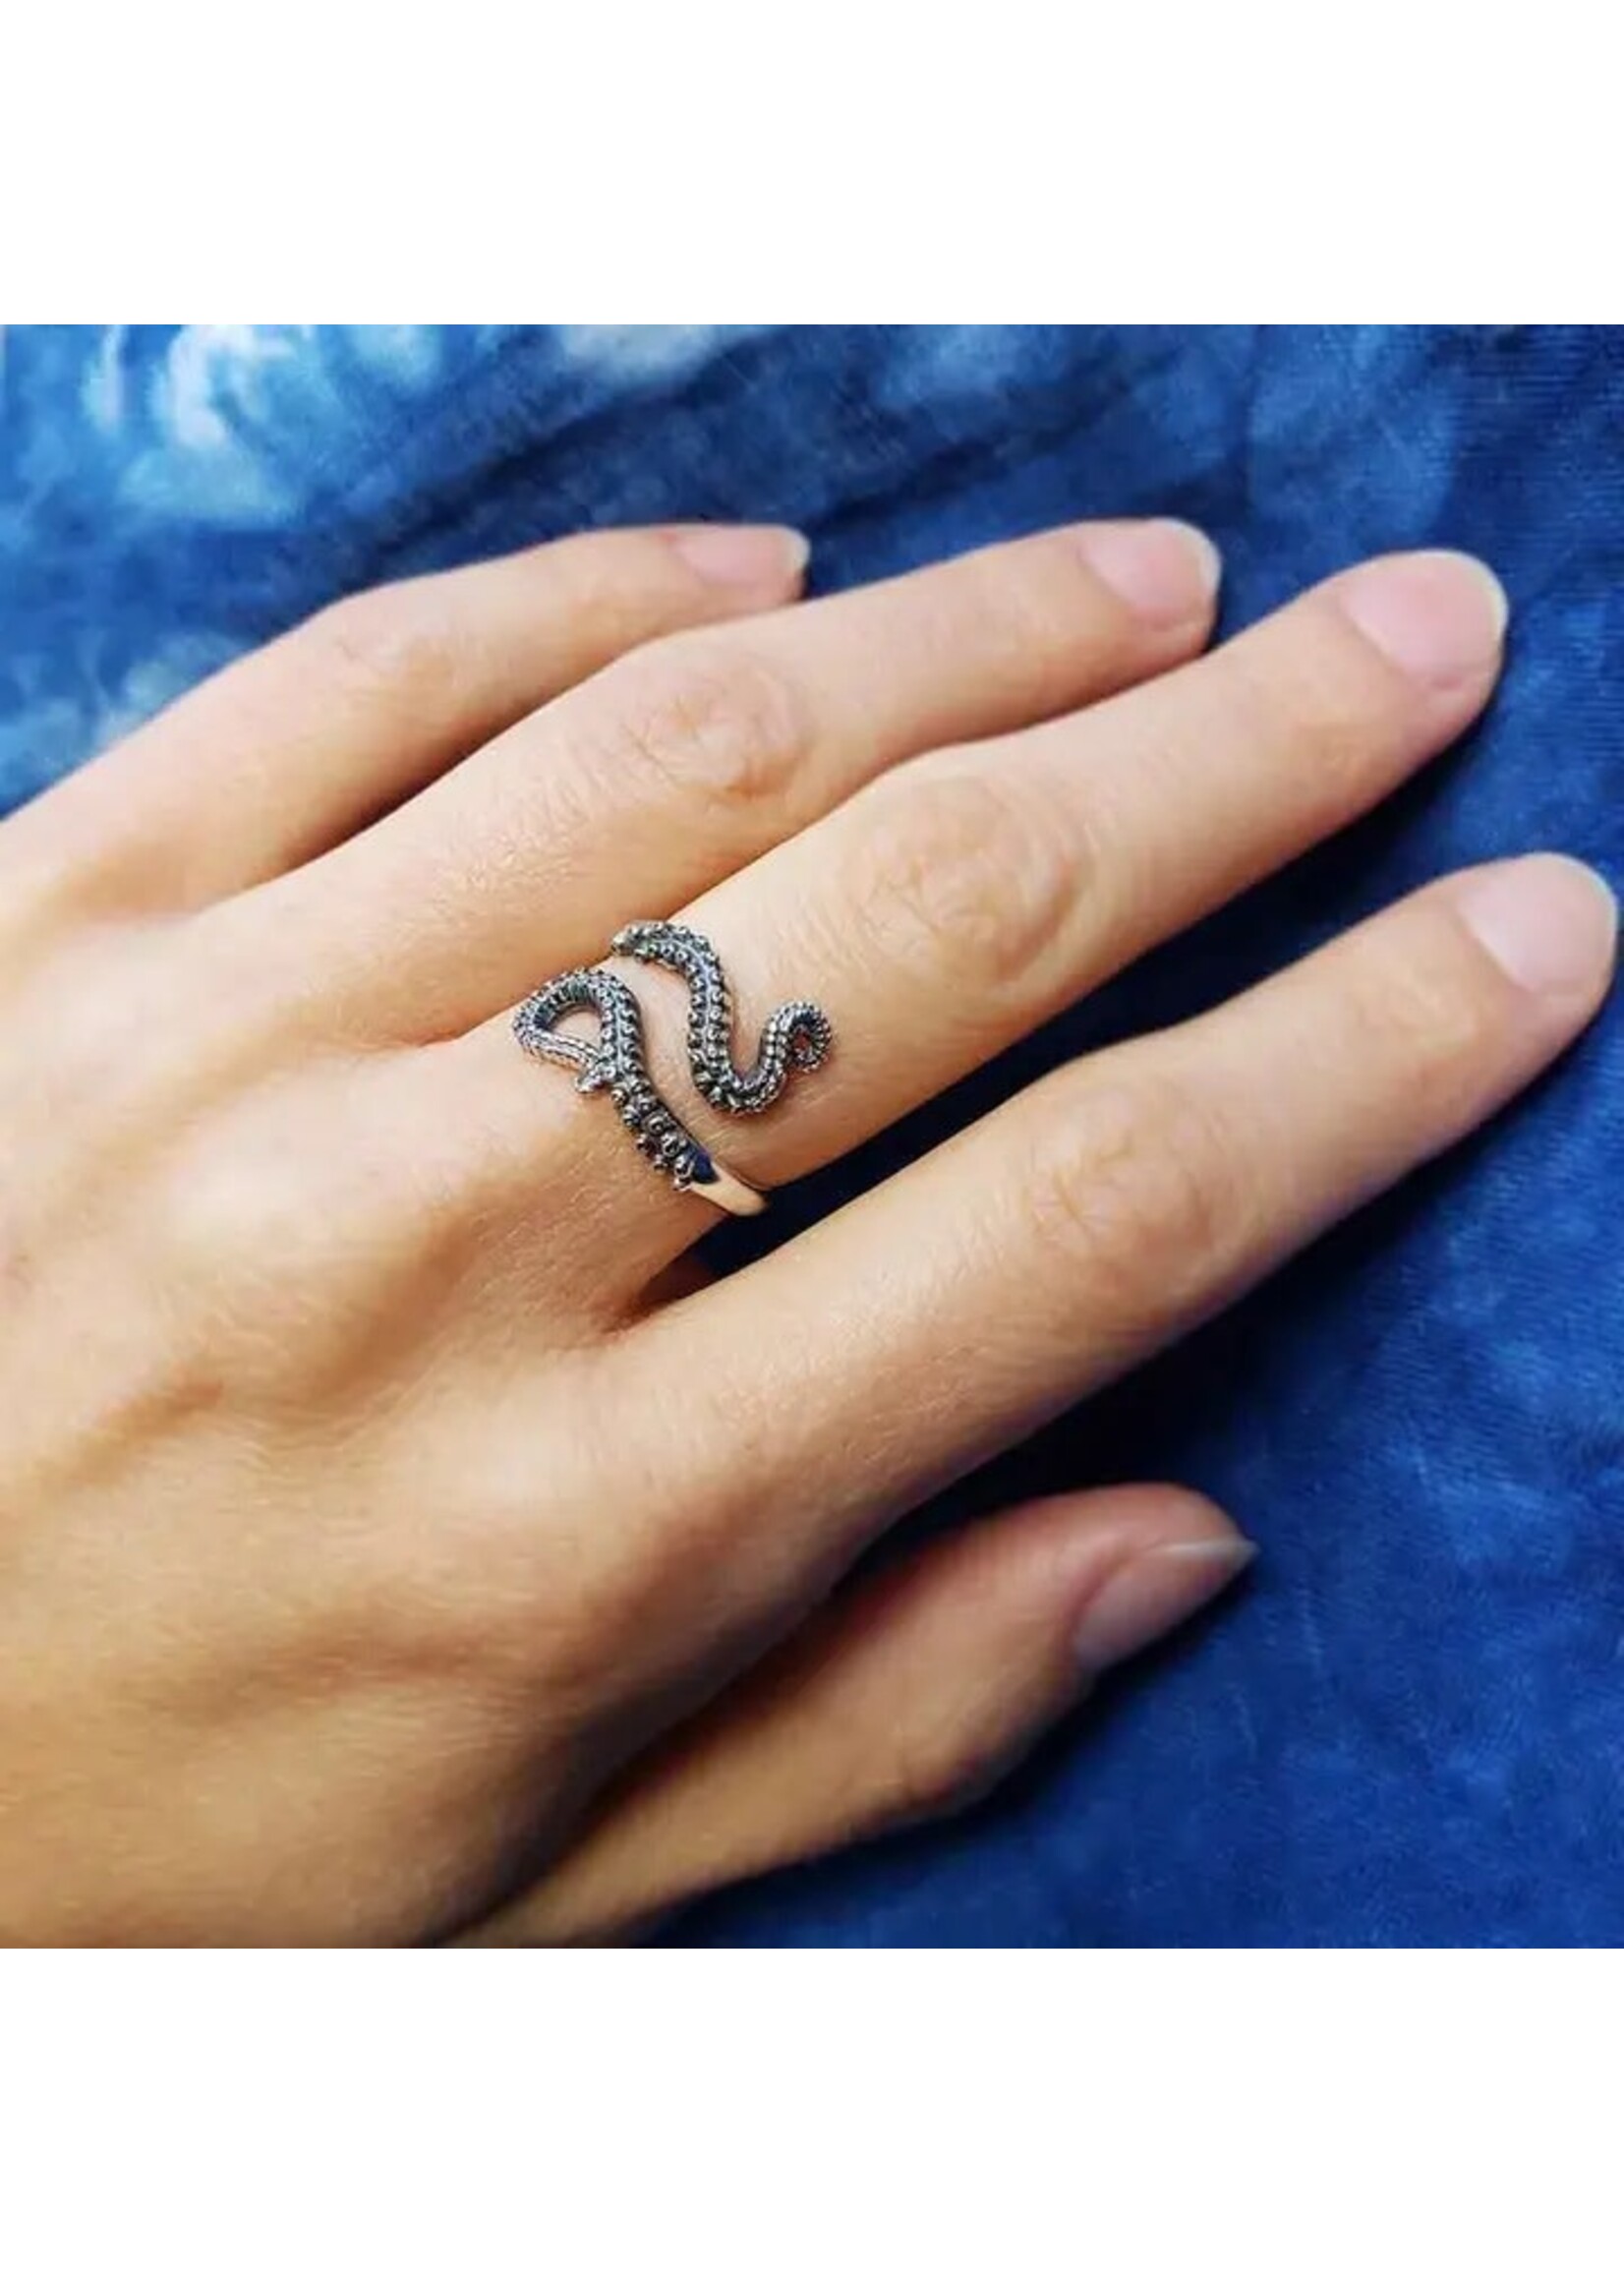 Ring- Octopus Tentacle Sterling Silver